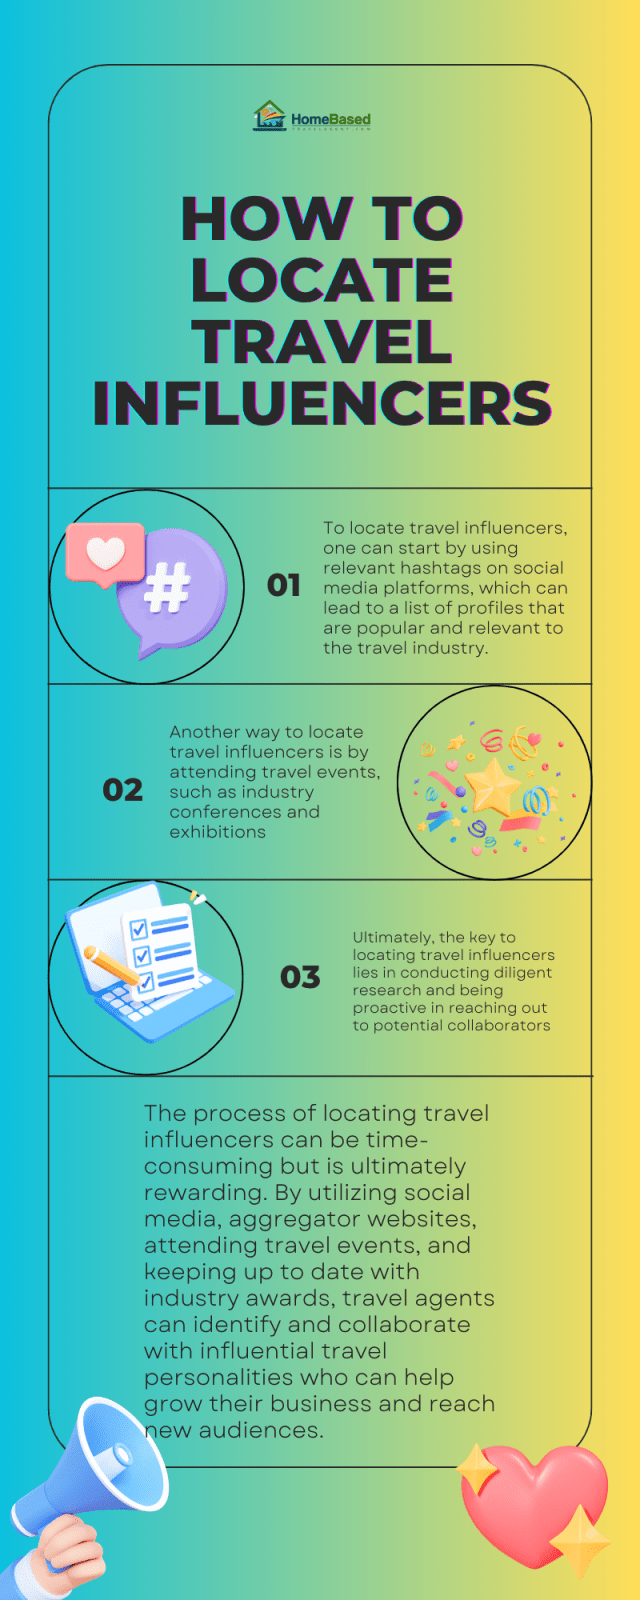 How-to-Locate-a-Travel-Influencer-Marketer-in-2023-Infographic-HBTA.png
